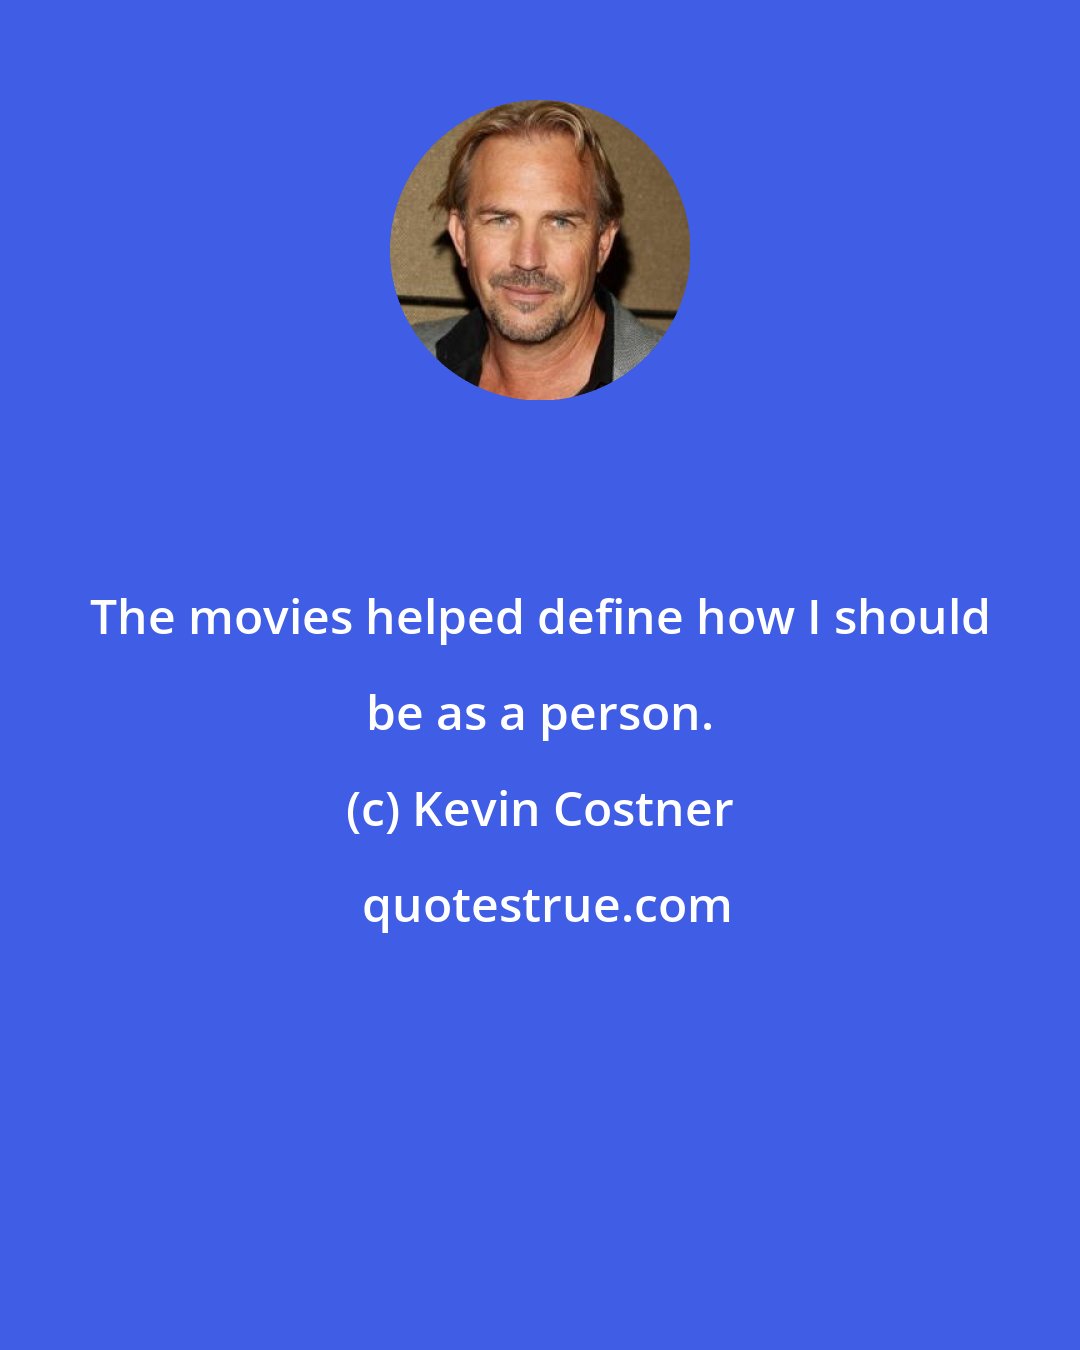 Kevin Costner: The movies helped define how I should be as a person.